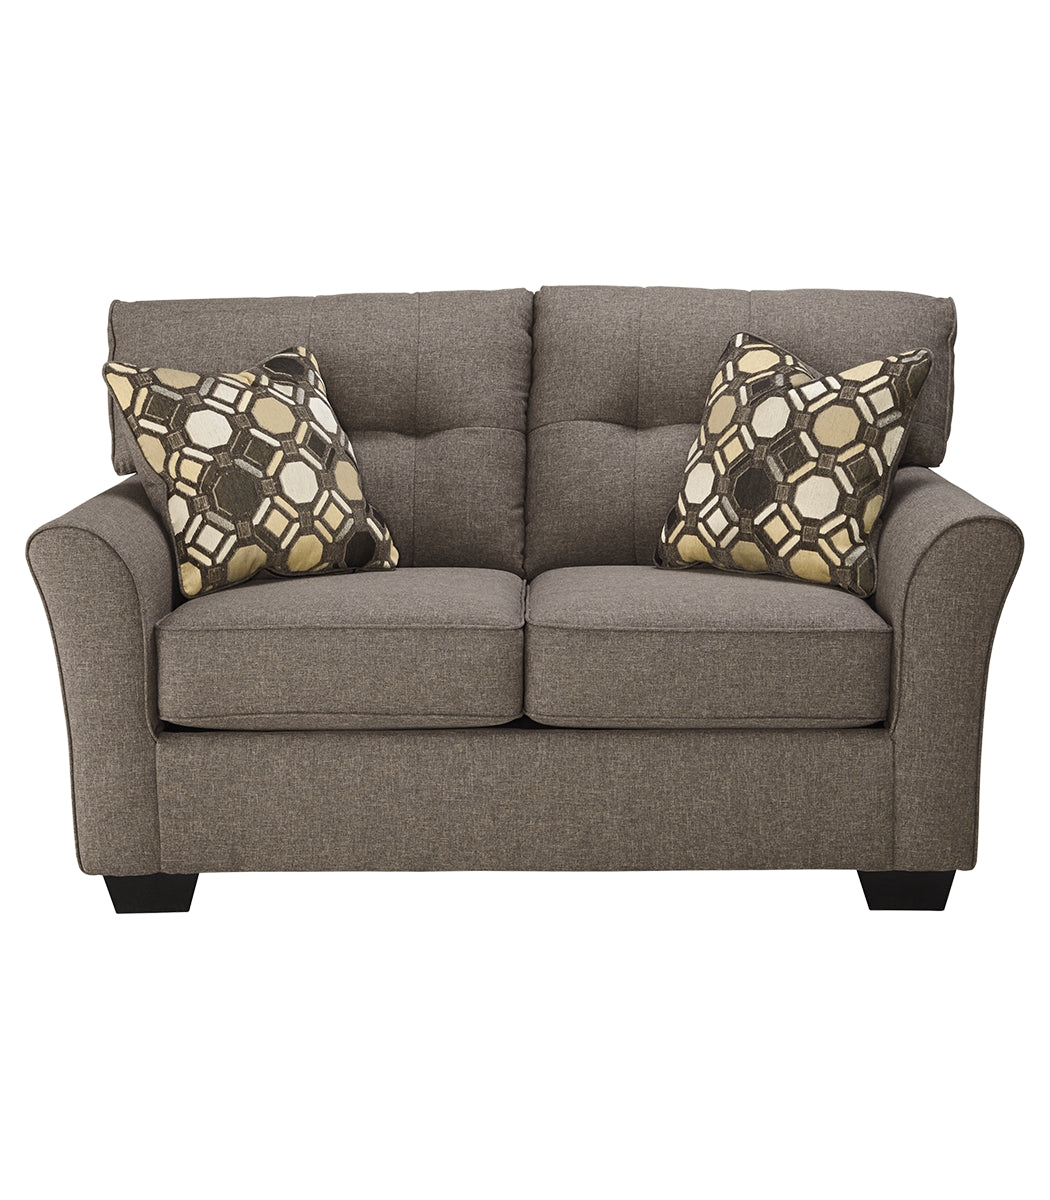 Tibbee Sofa, Loveseat and Chaise